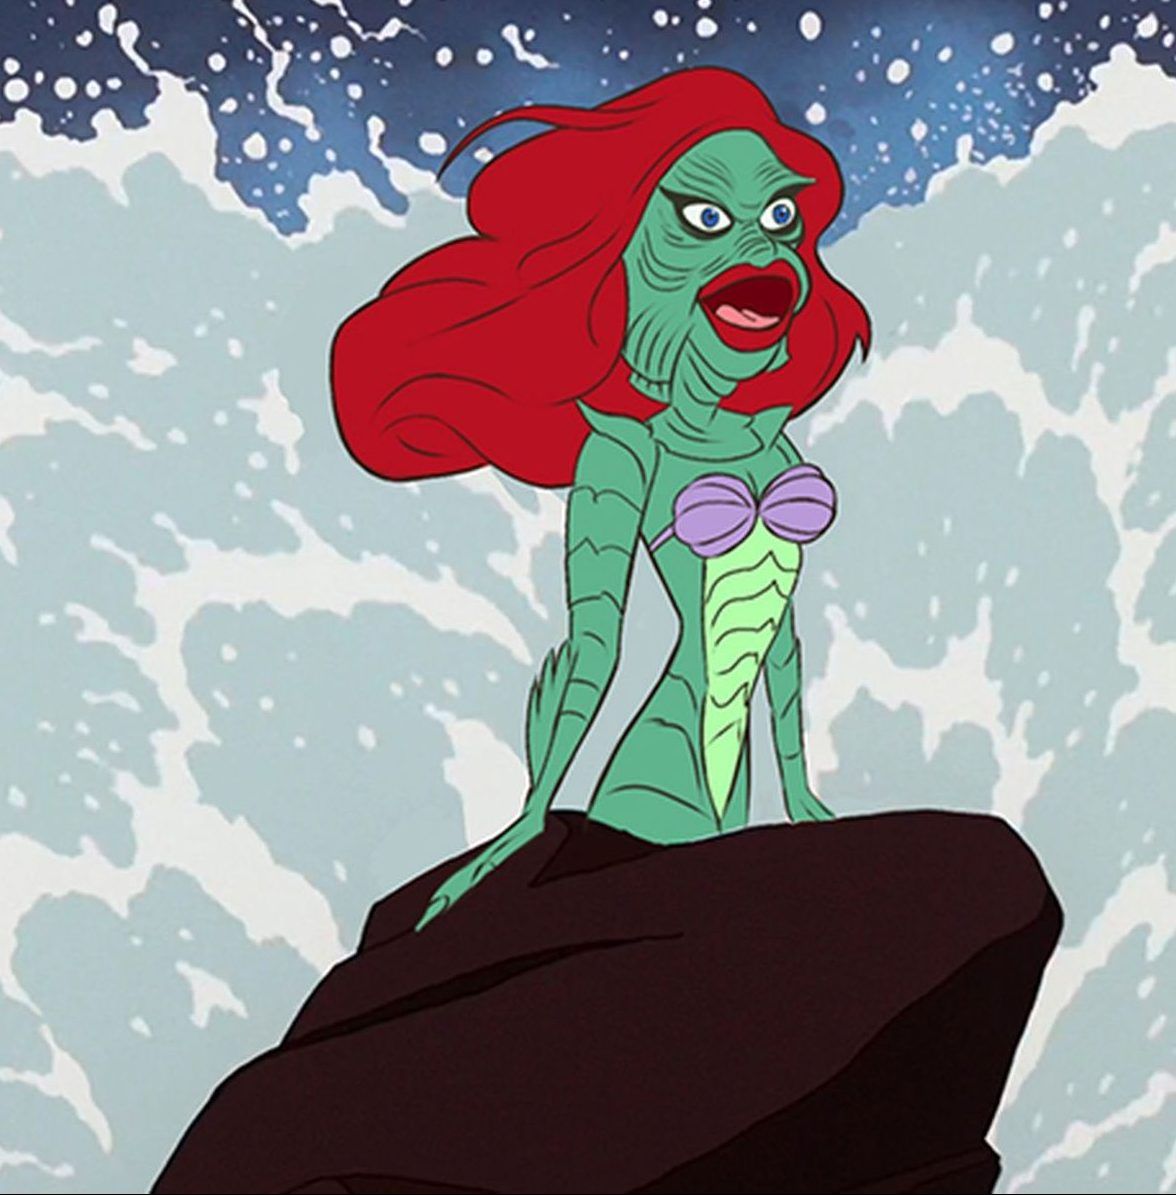 Ariel as Creature from the Black Lagoon